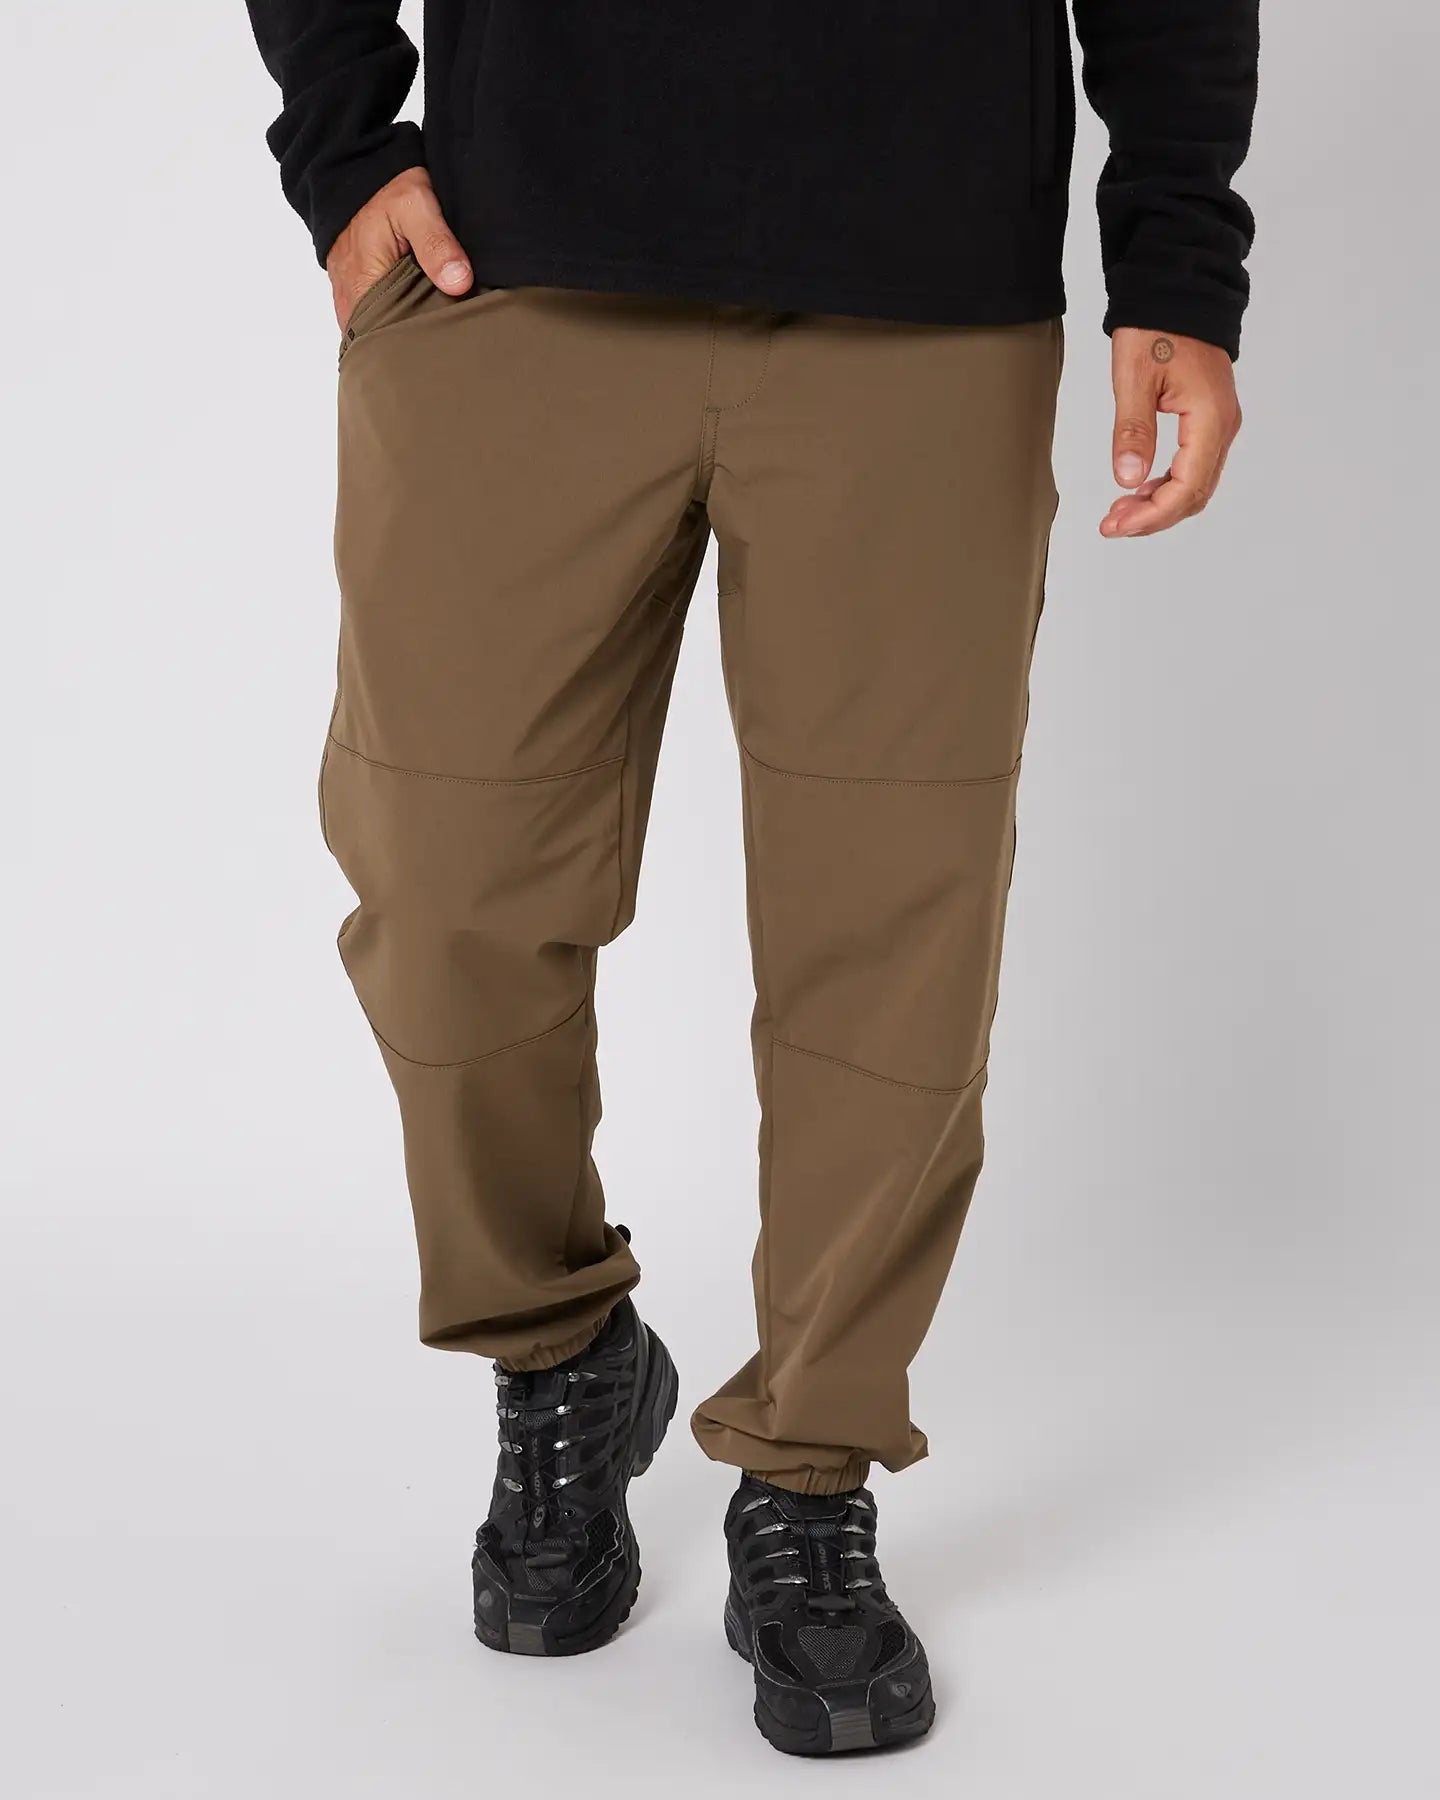 Follow All Day Pants - Deep Taupe 2